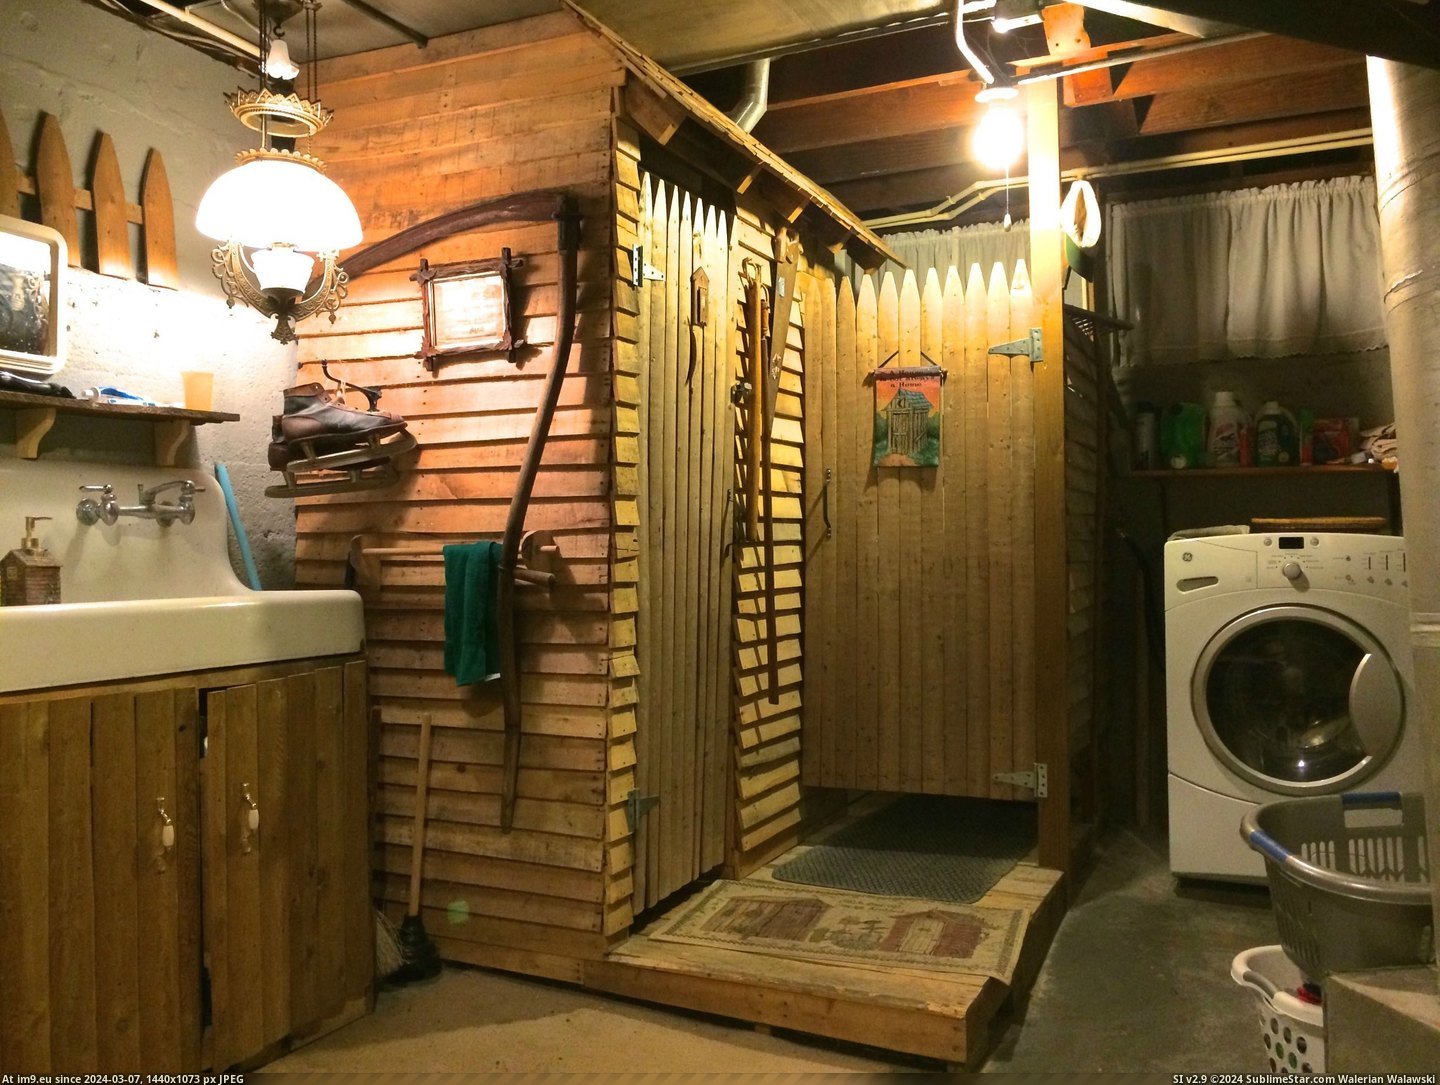 #Guys #Dad #Isn #Basement #Told #Built [Pics] My dad isn't on Reddit, but I told him you guys would appreciate the outhouse he built in their basement. 1 Pic. (Image of album My r/PICS favs))